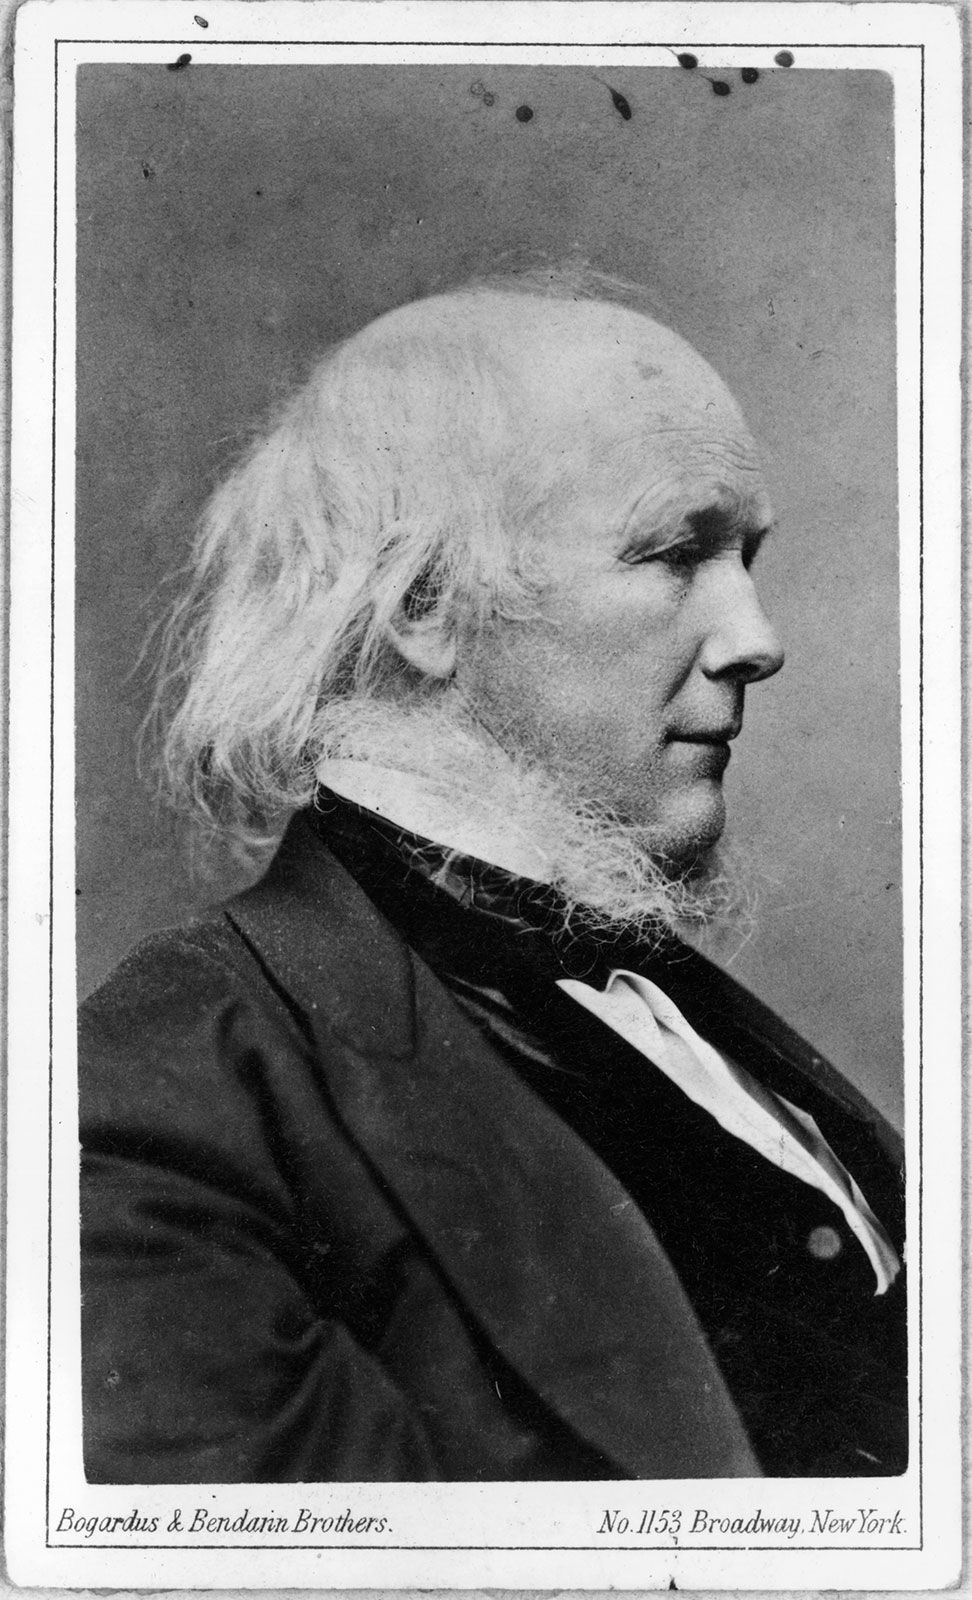 Pictured is American abolitionist, journalist and politician Horace Greeley, who edited the New York Tribune.